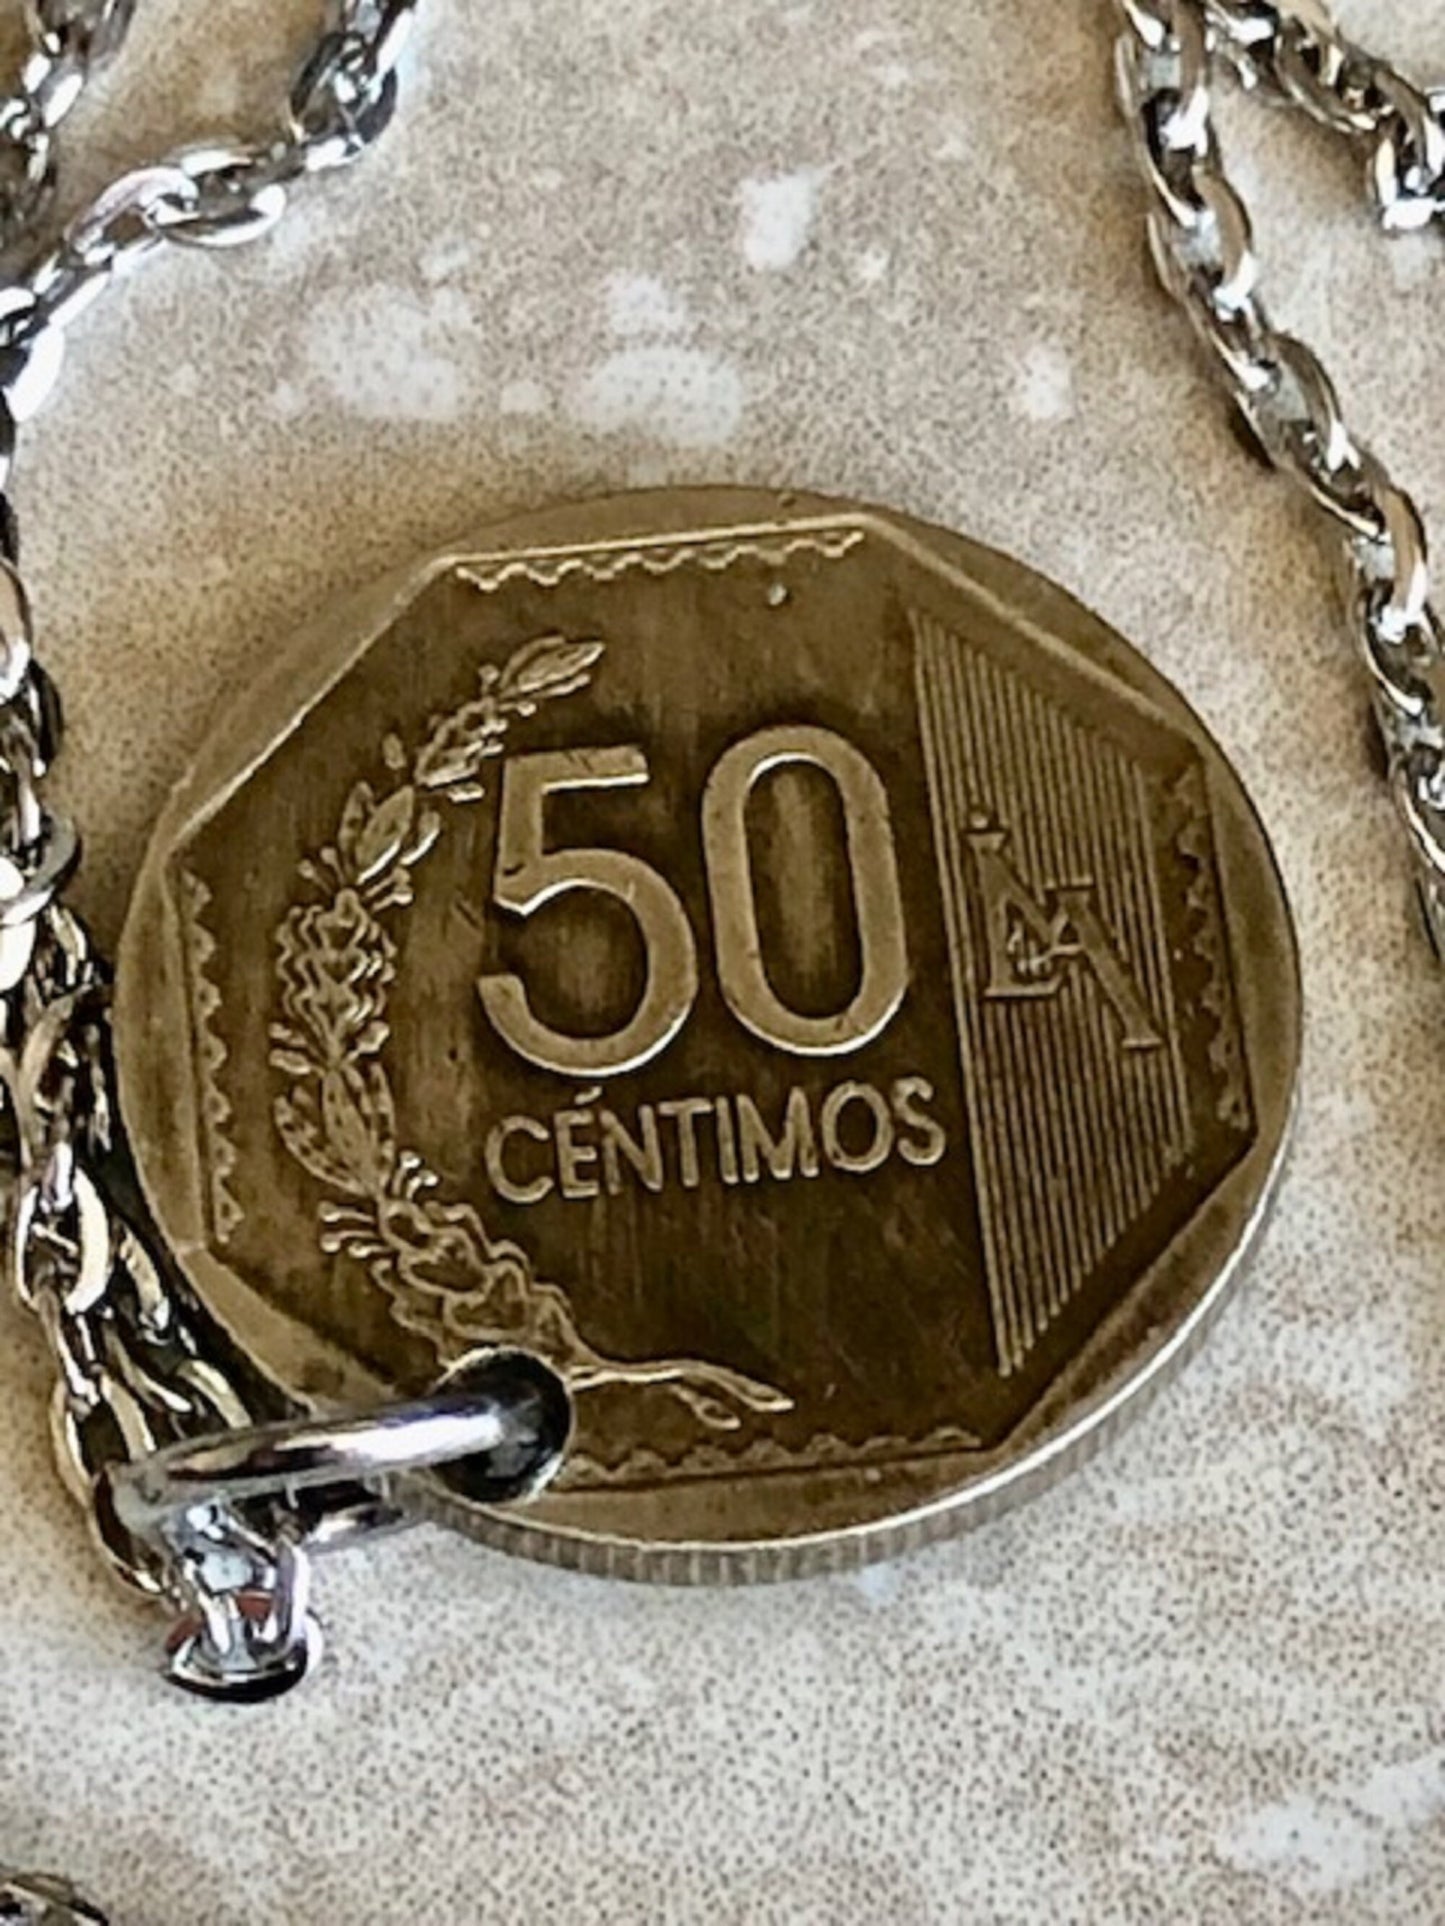 Peru Coin Pendant Peruvian 50 Centimos De Oro Personal Necklace Vintage Handmade Jewelry Gift Friend Charm For Him Her World Coin Collector